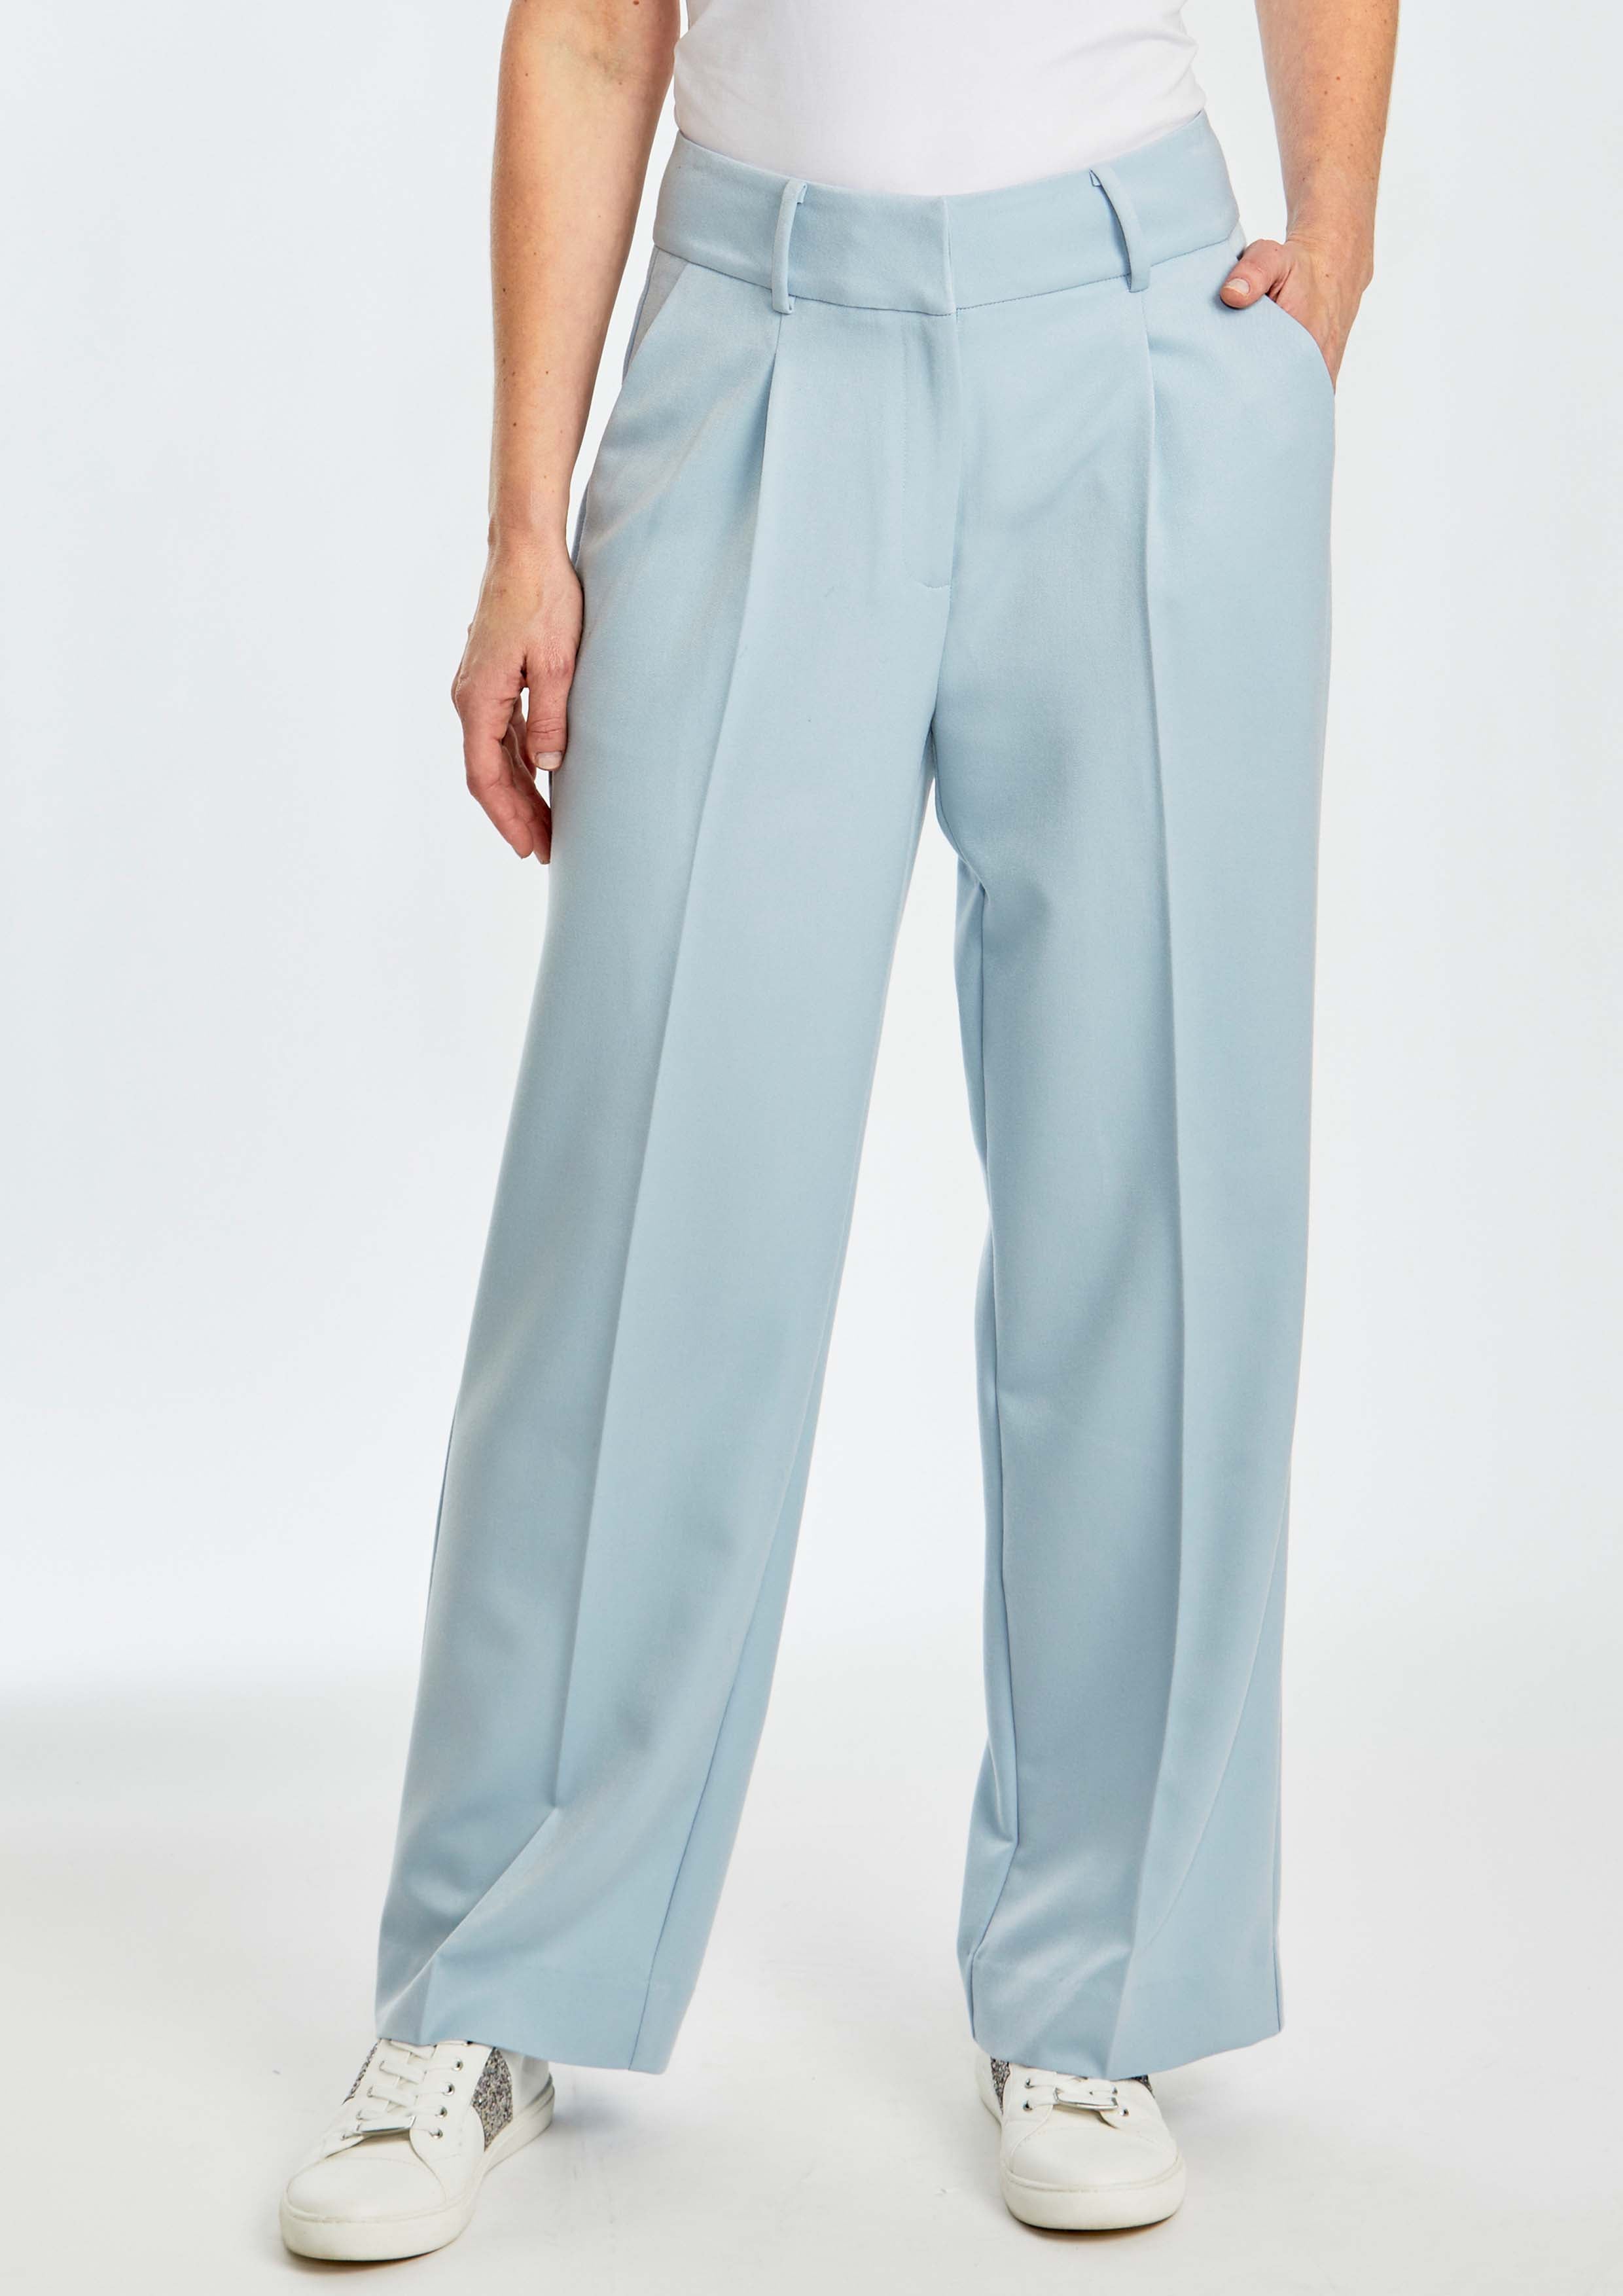 Ping Pong City Trouser - Baby Blue